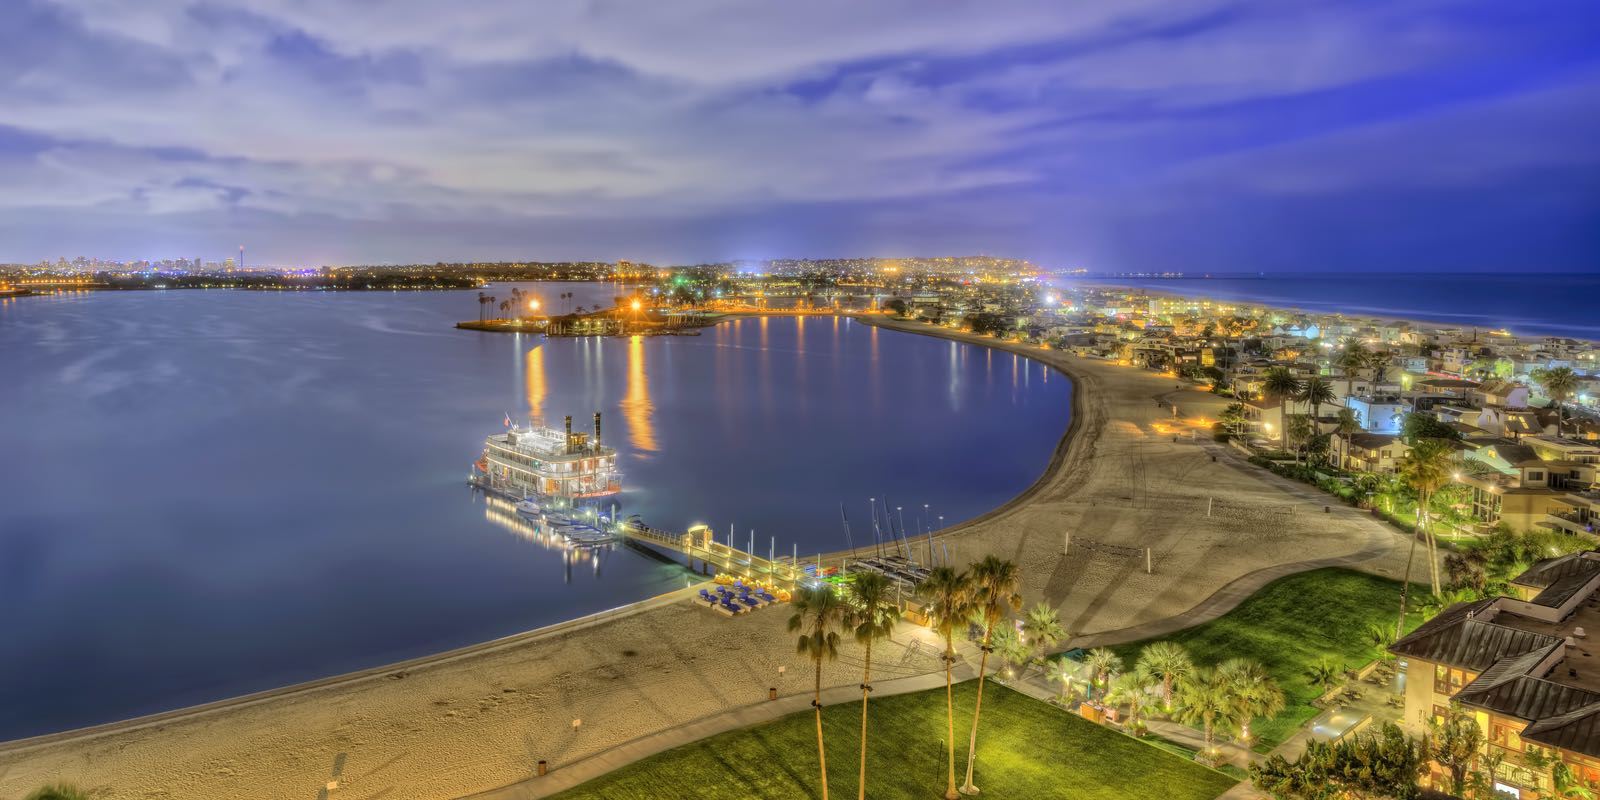 An arial view of the San Diego Harbor.